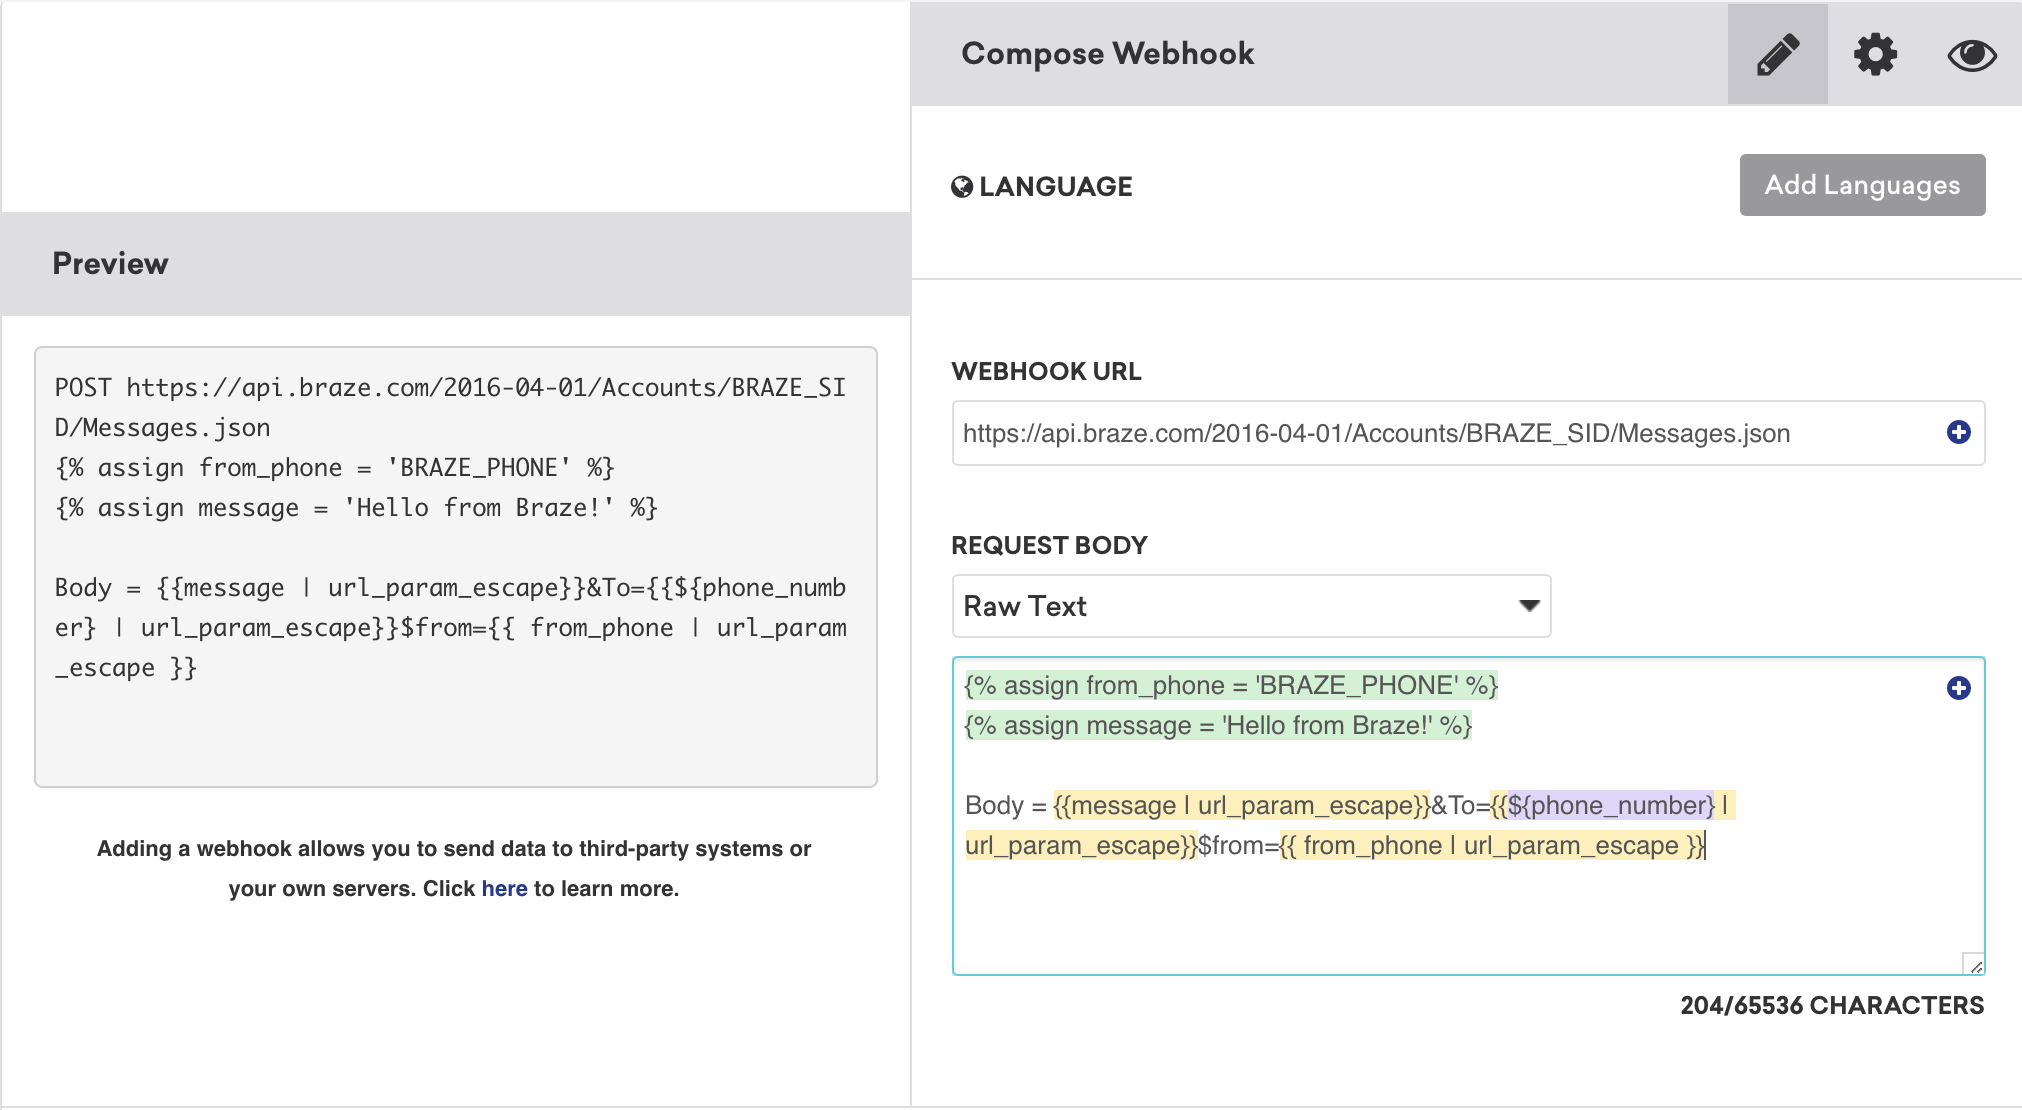 Compose tab when creating a webhook template. Available fields are language, webhook URL, and request body.